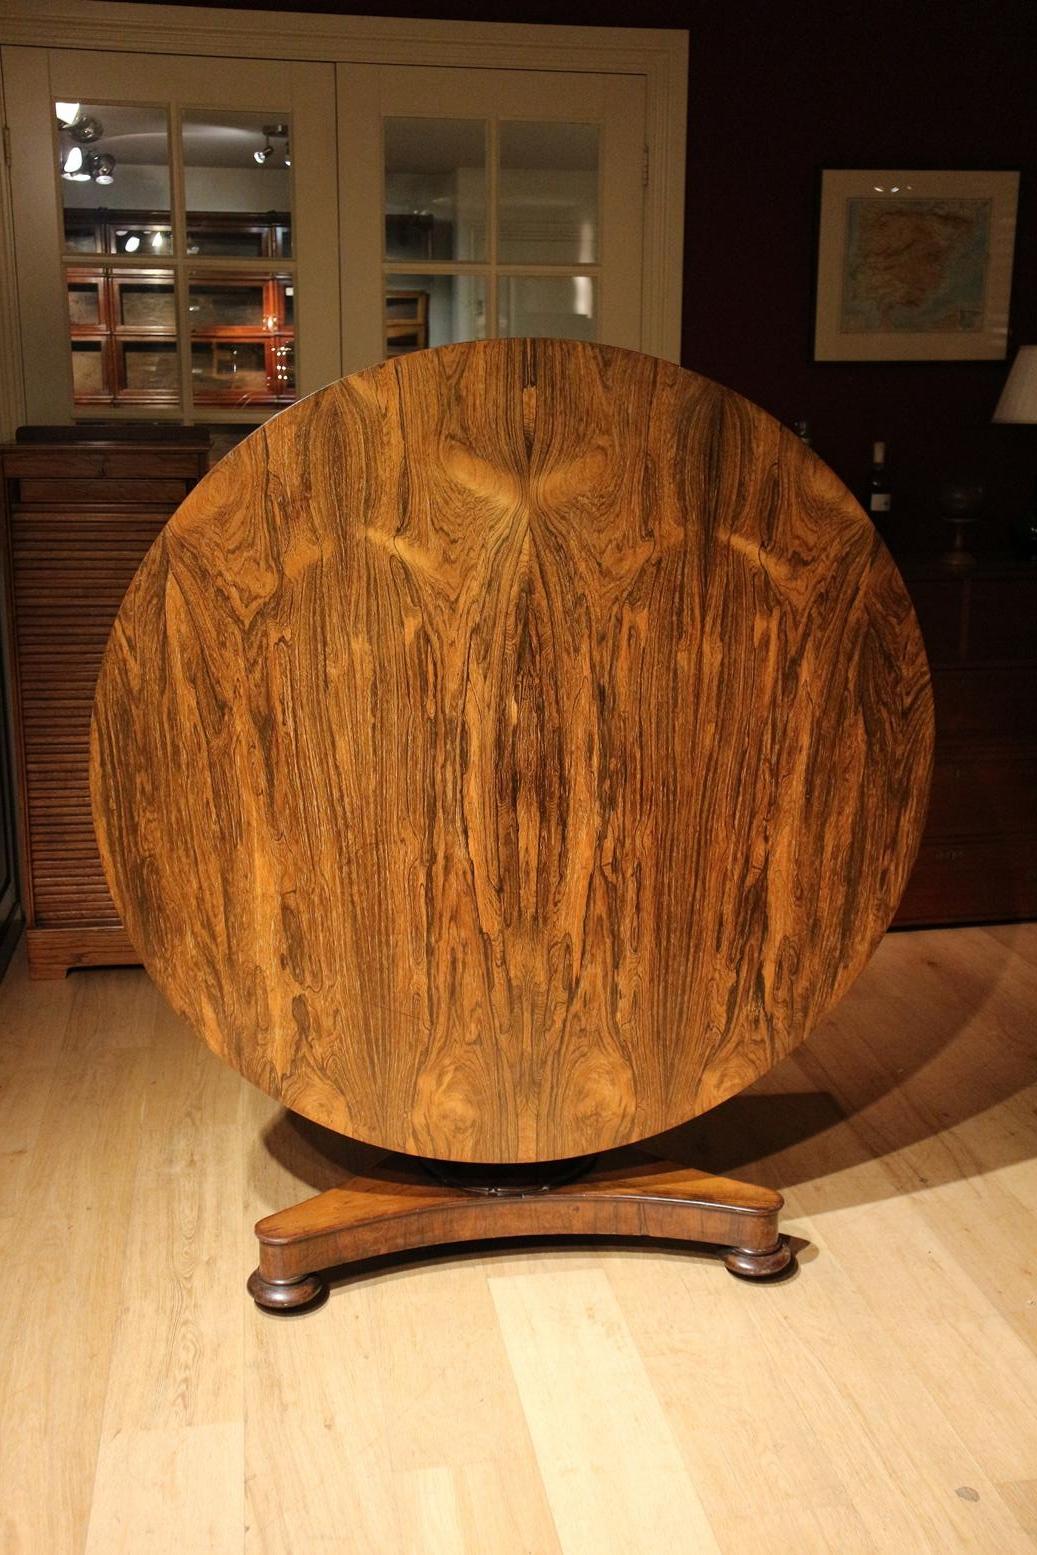 Beautiful antique round rosewood dining room table in perfect and original condition. The table can also be used nicely as a large side table next to a sofa.
Origin: England
Period: Approx. 1830
Size: diameter 122 cm, height 71 cm Legroom 65 cm.